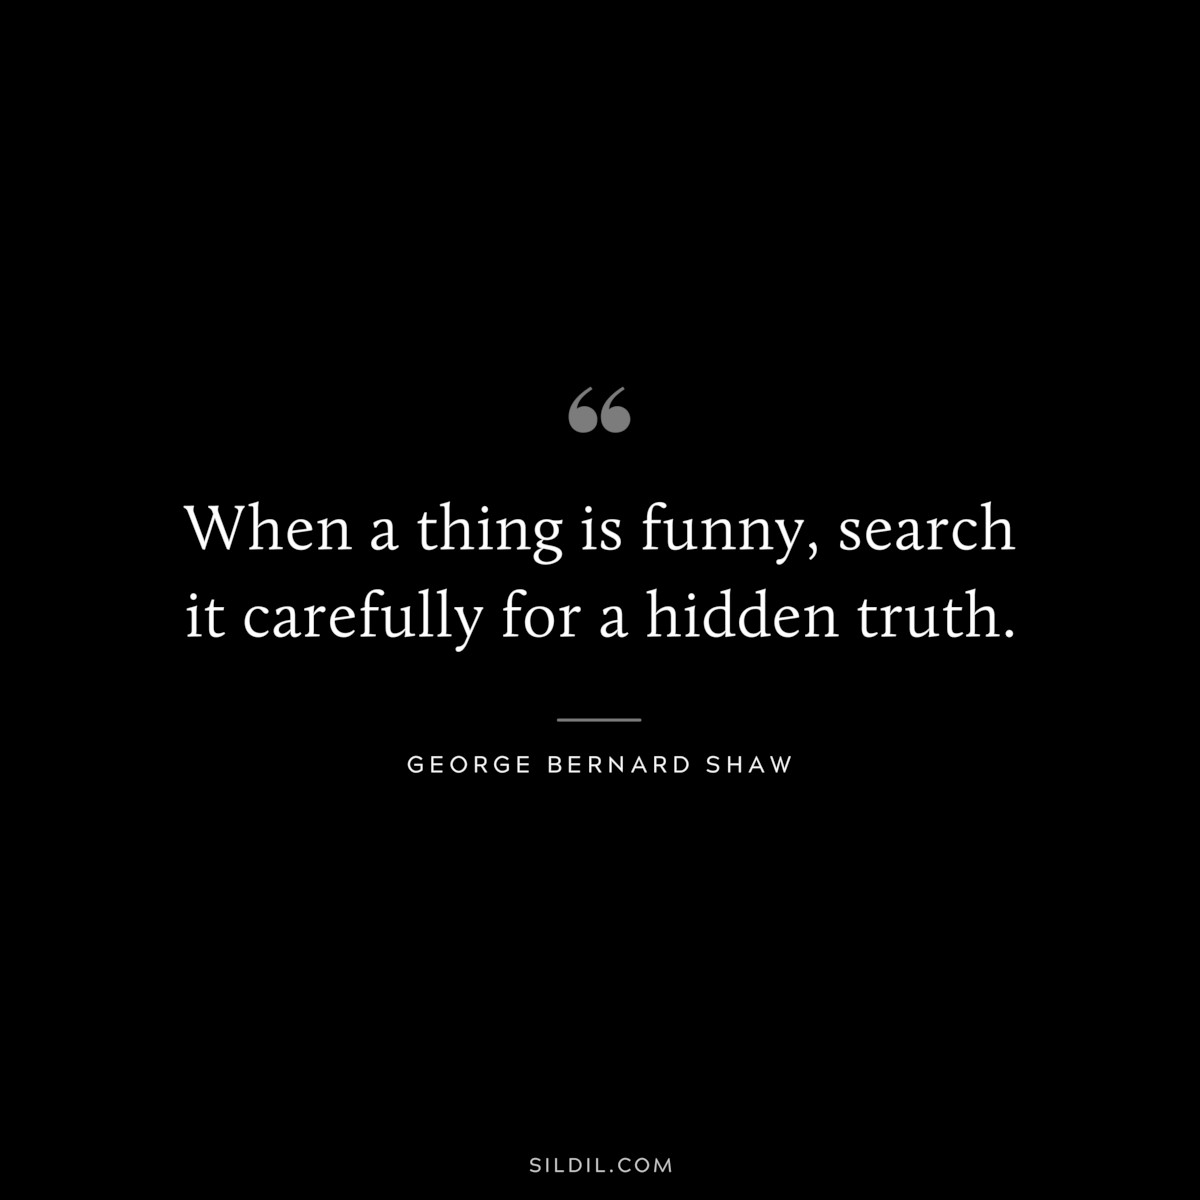 When a thing is funny, search it carefully for a hidden truth. ― George Bernard Shaw